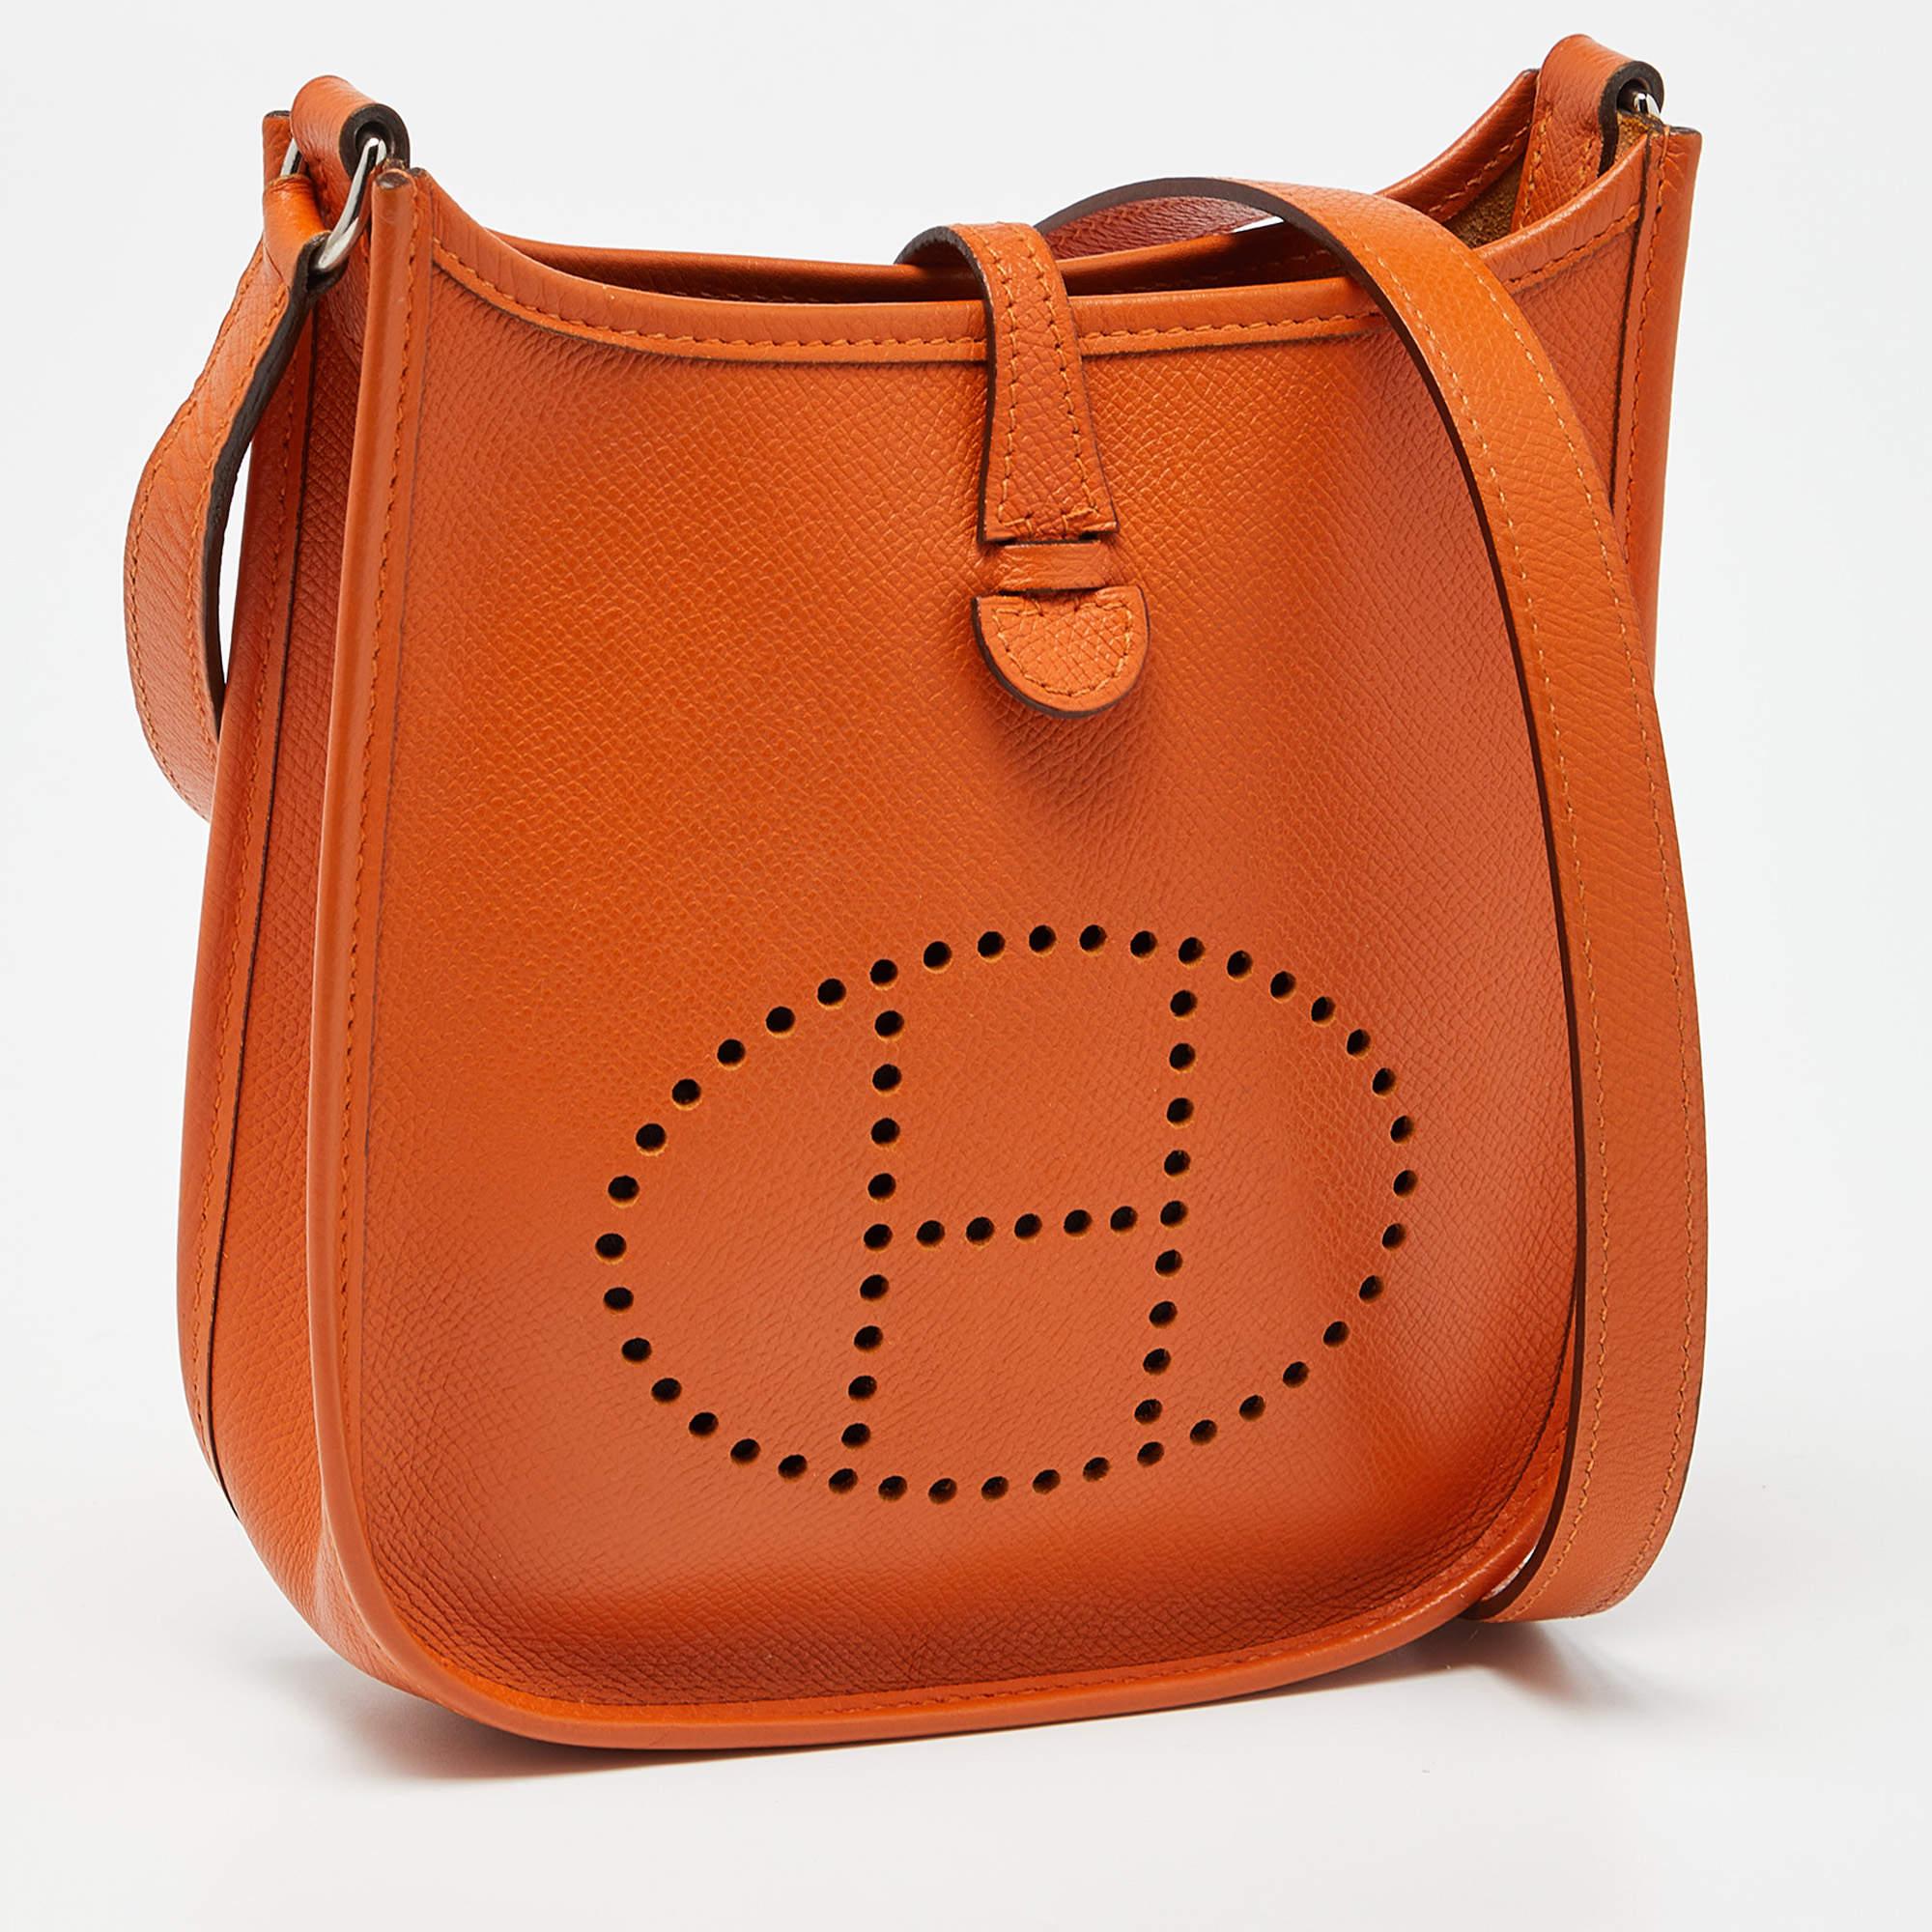 The Hermès Evelyne TPM Bag is a small, crossbody bag known for its vibrant orange color and durable Epsom leather construction. It features a perforated 